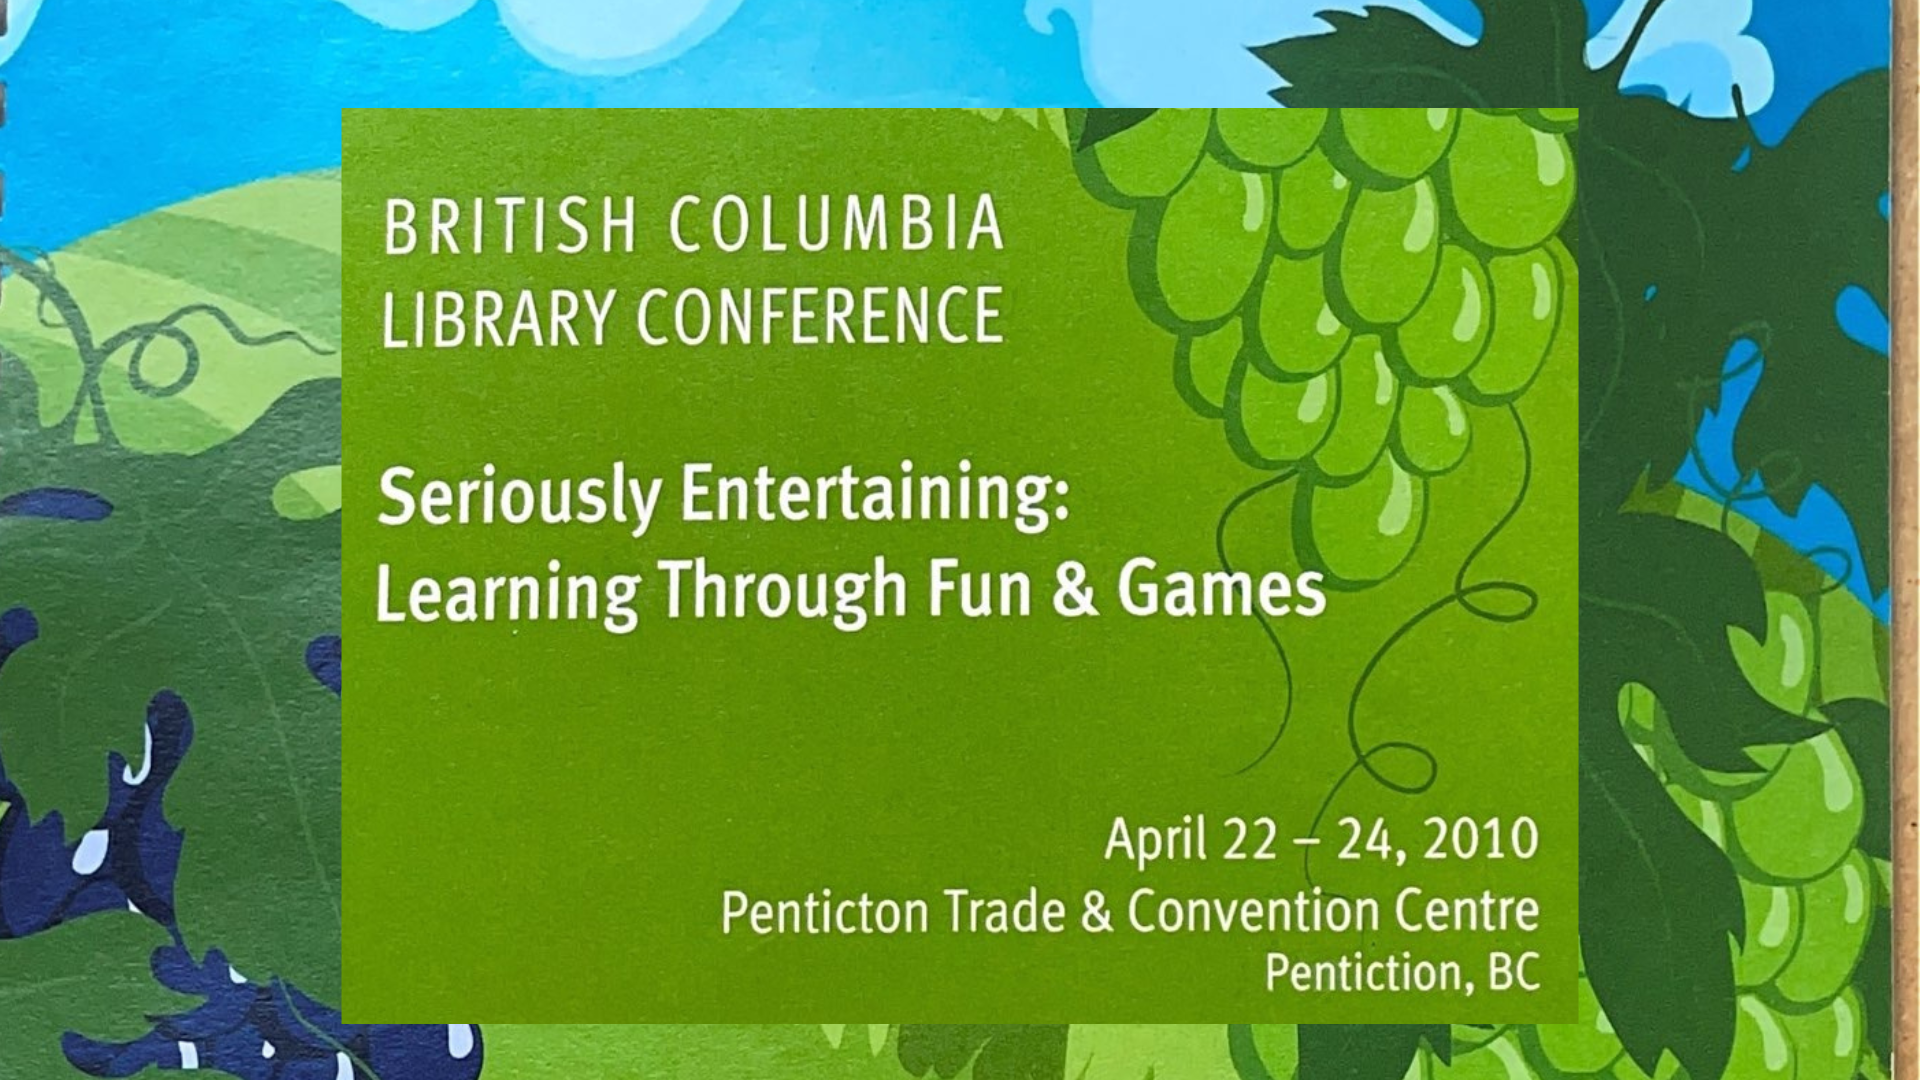 Graphic with text "British Columbia Library Conference Seriously Entertaining: Learning through fun and games April 22-24, 2010 Penticton Trade and Convention Centre, Pentiction, BC"